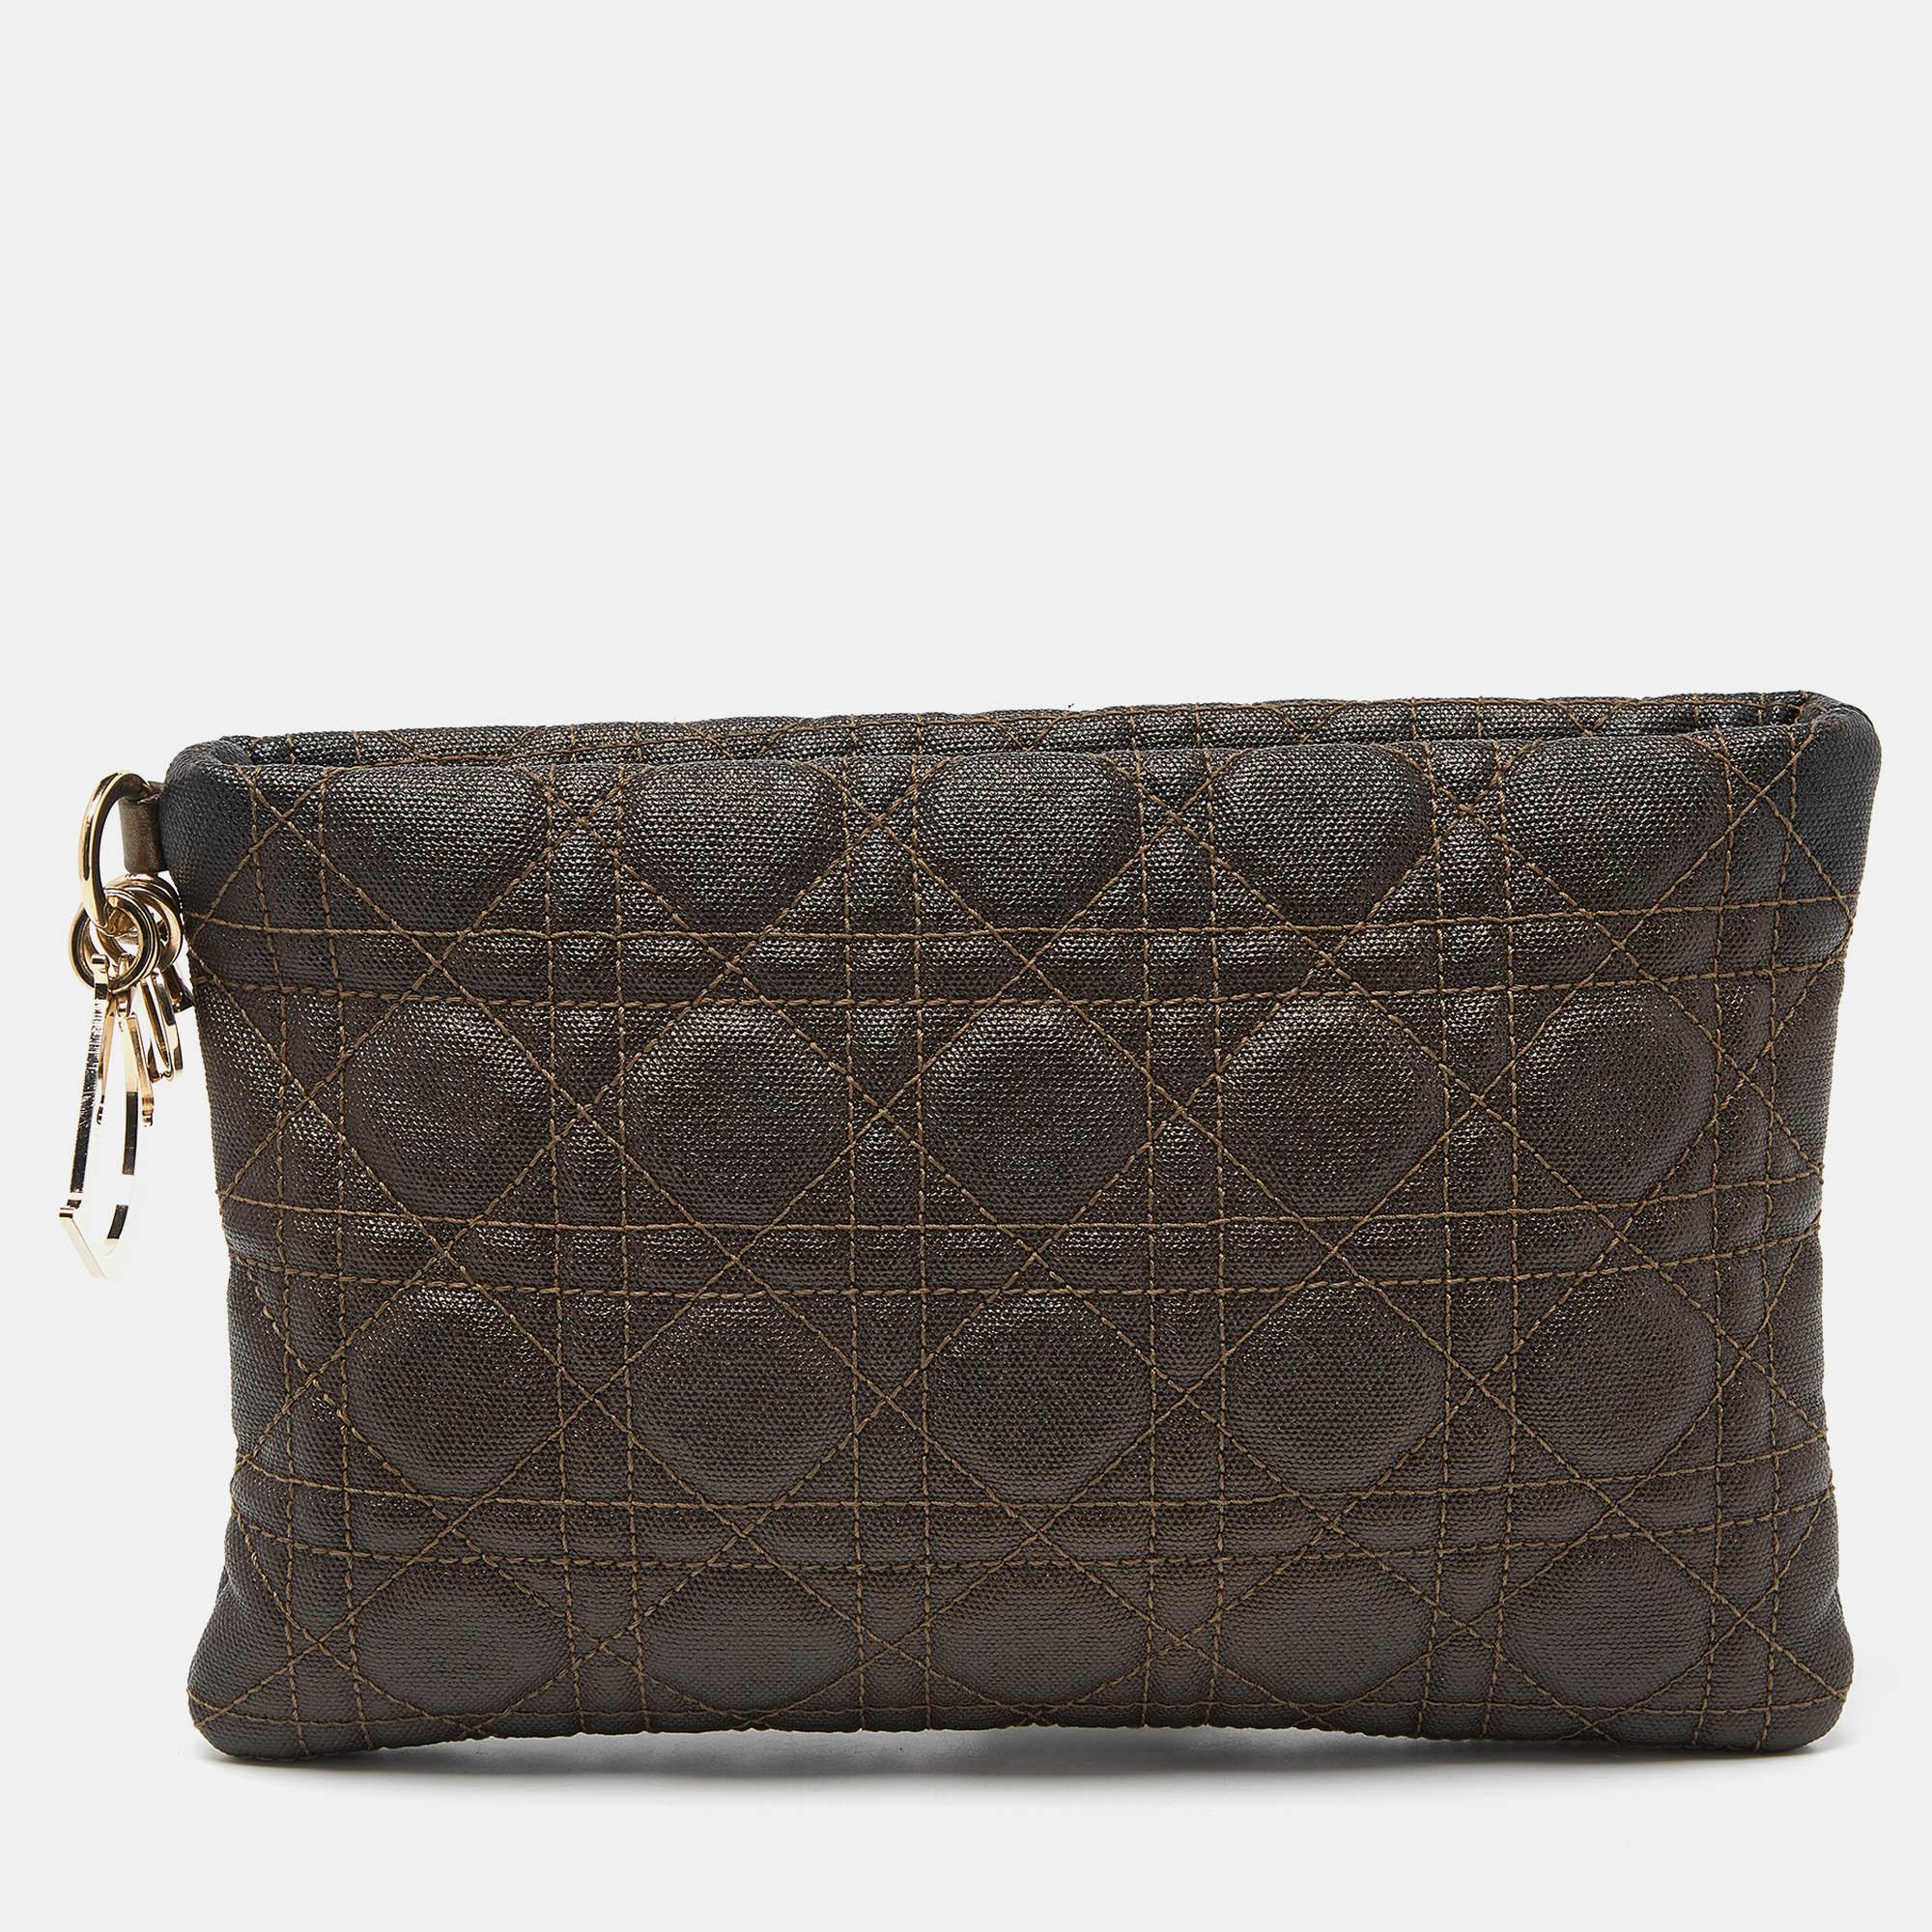 This Dior clutch for women has the kind of design that ensures high appeal, whether held in your hand or tucked under your arm. It is a meticulously crafted piece bound to last a long time.

